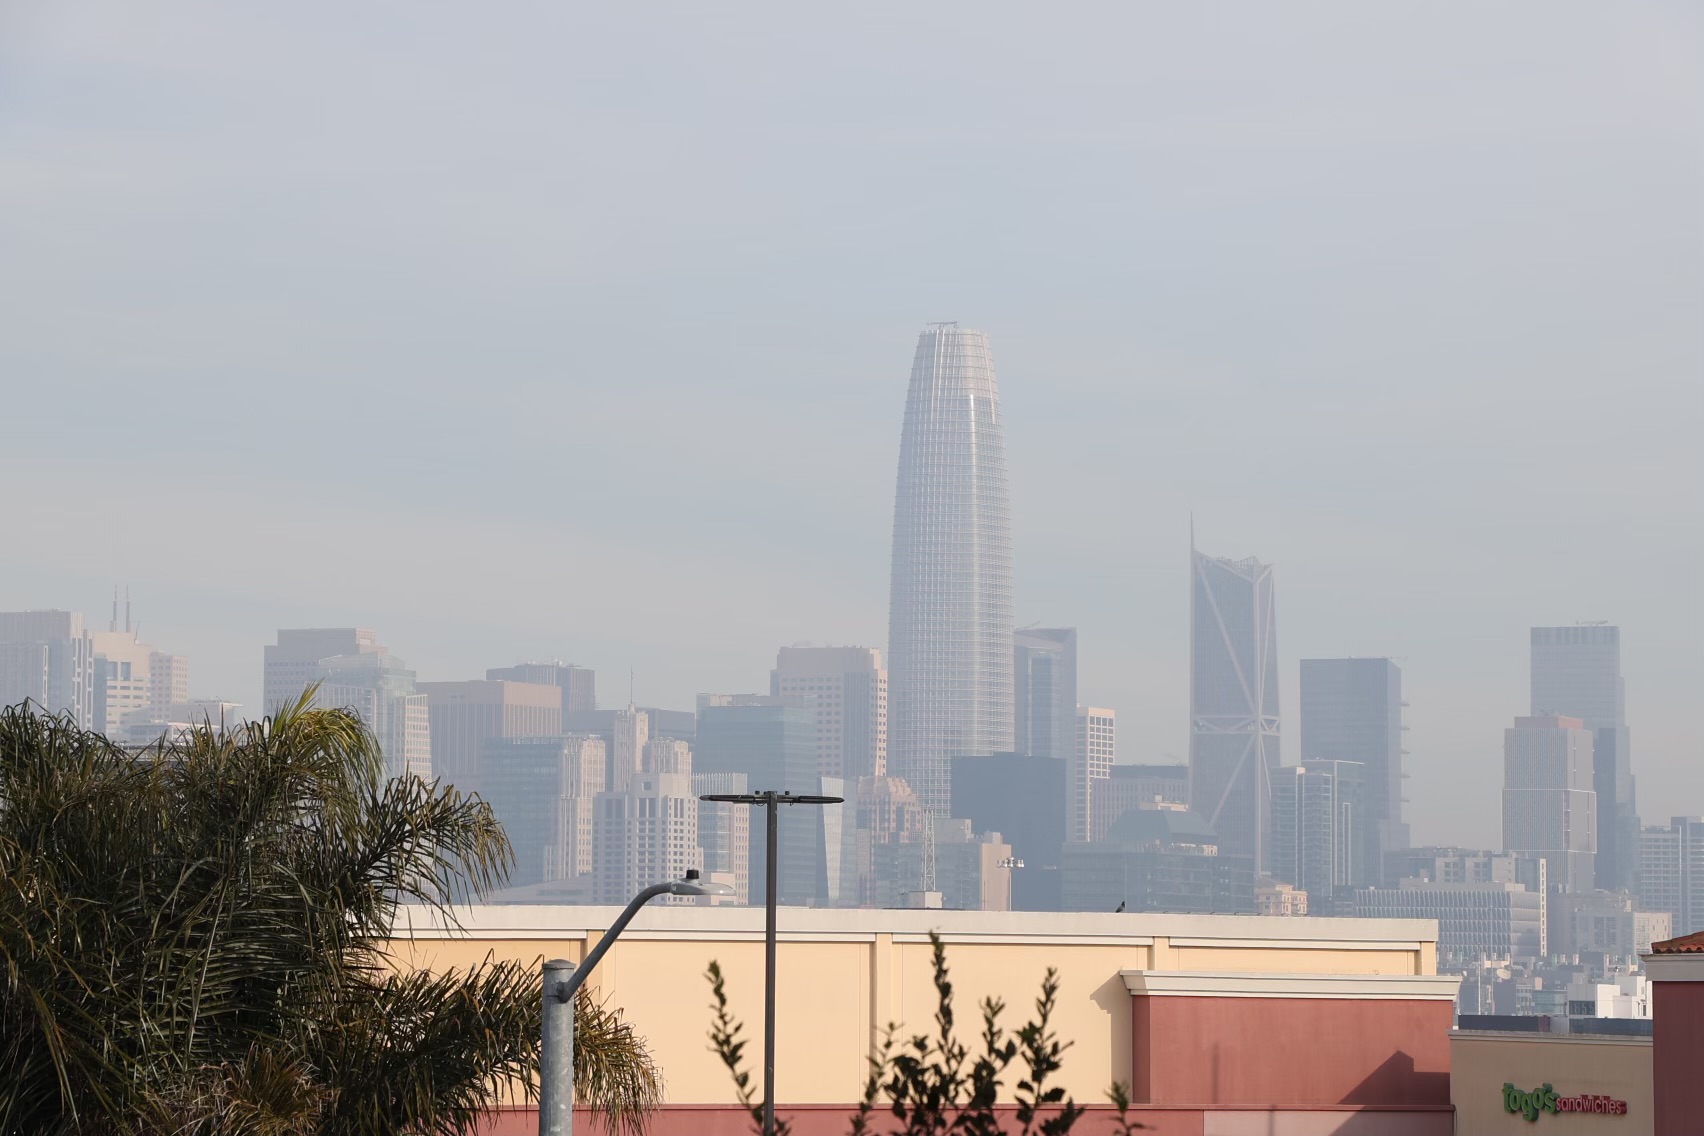 Polluted skies in San Francisco on January 13, 2022.